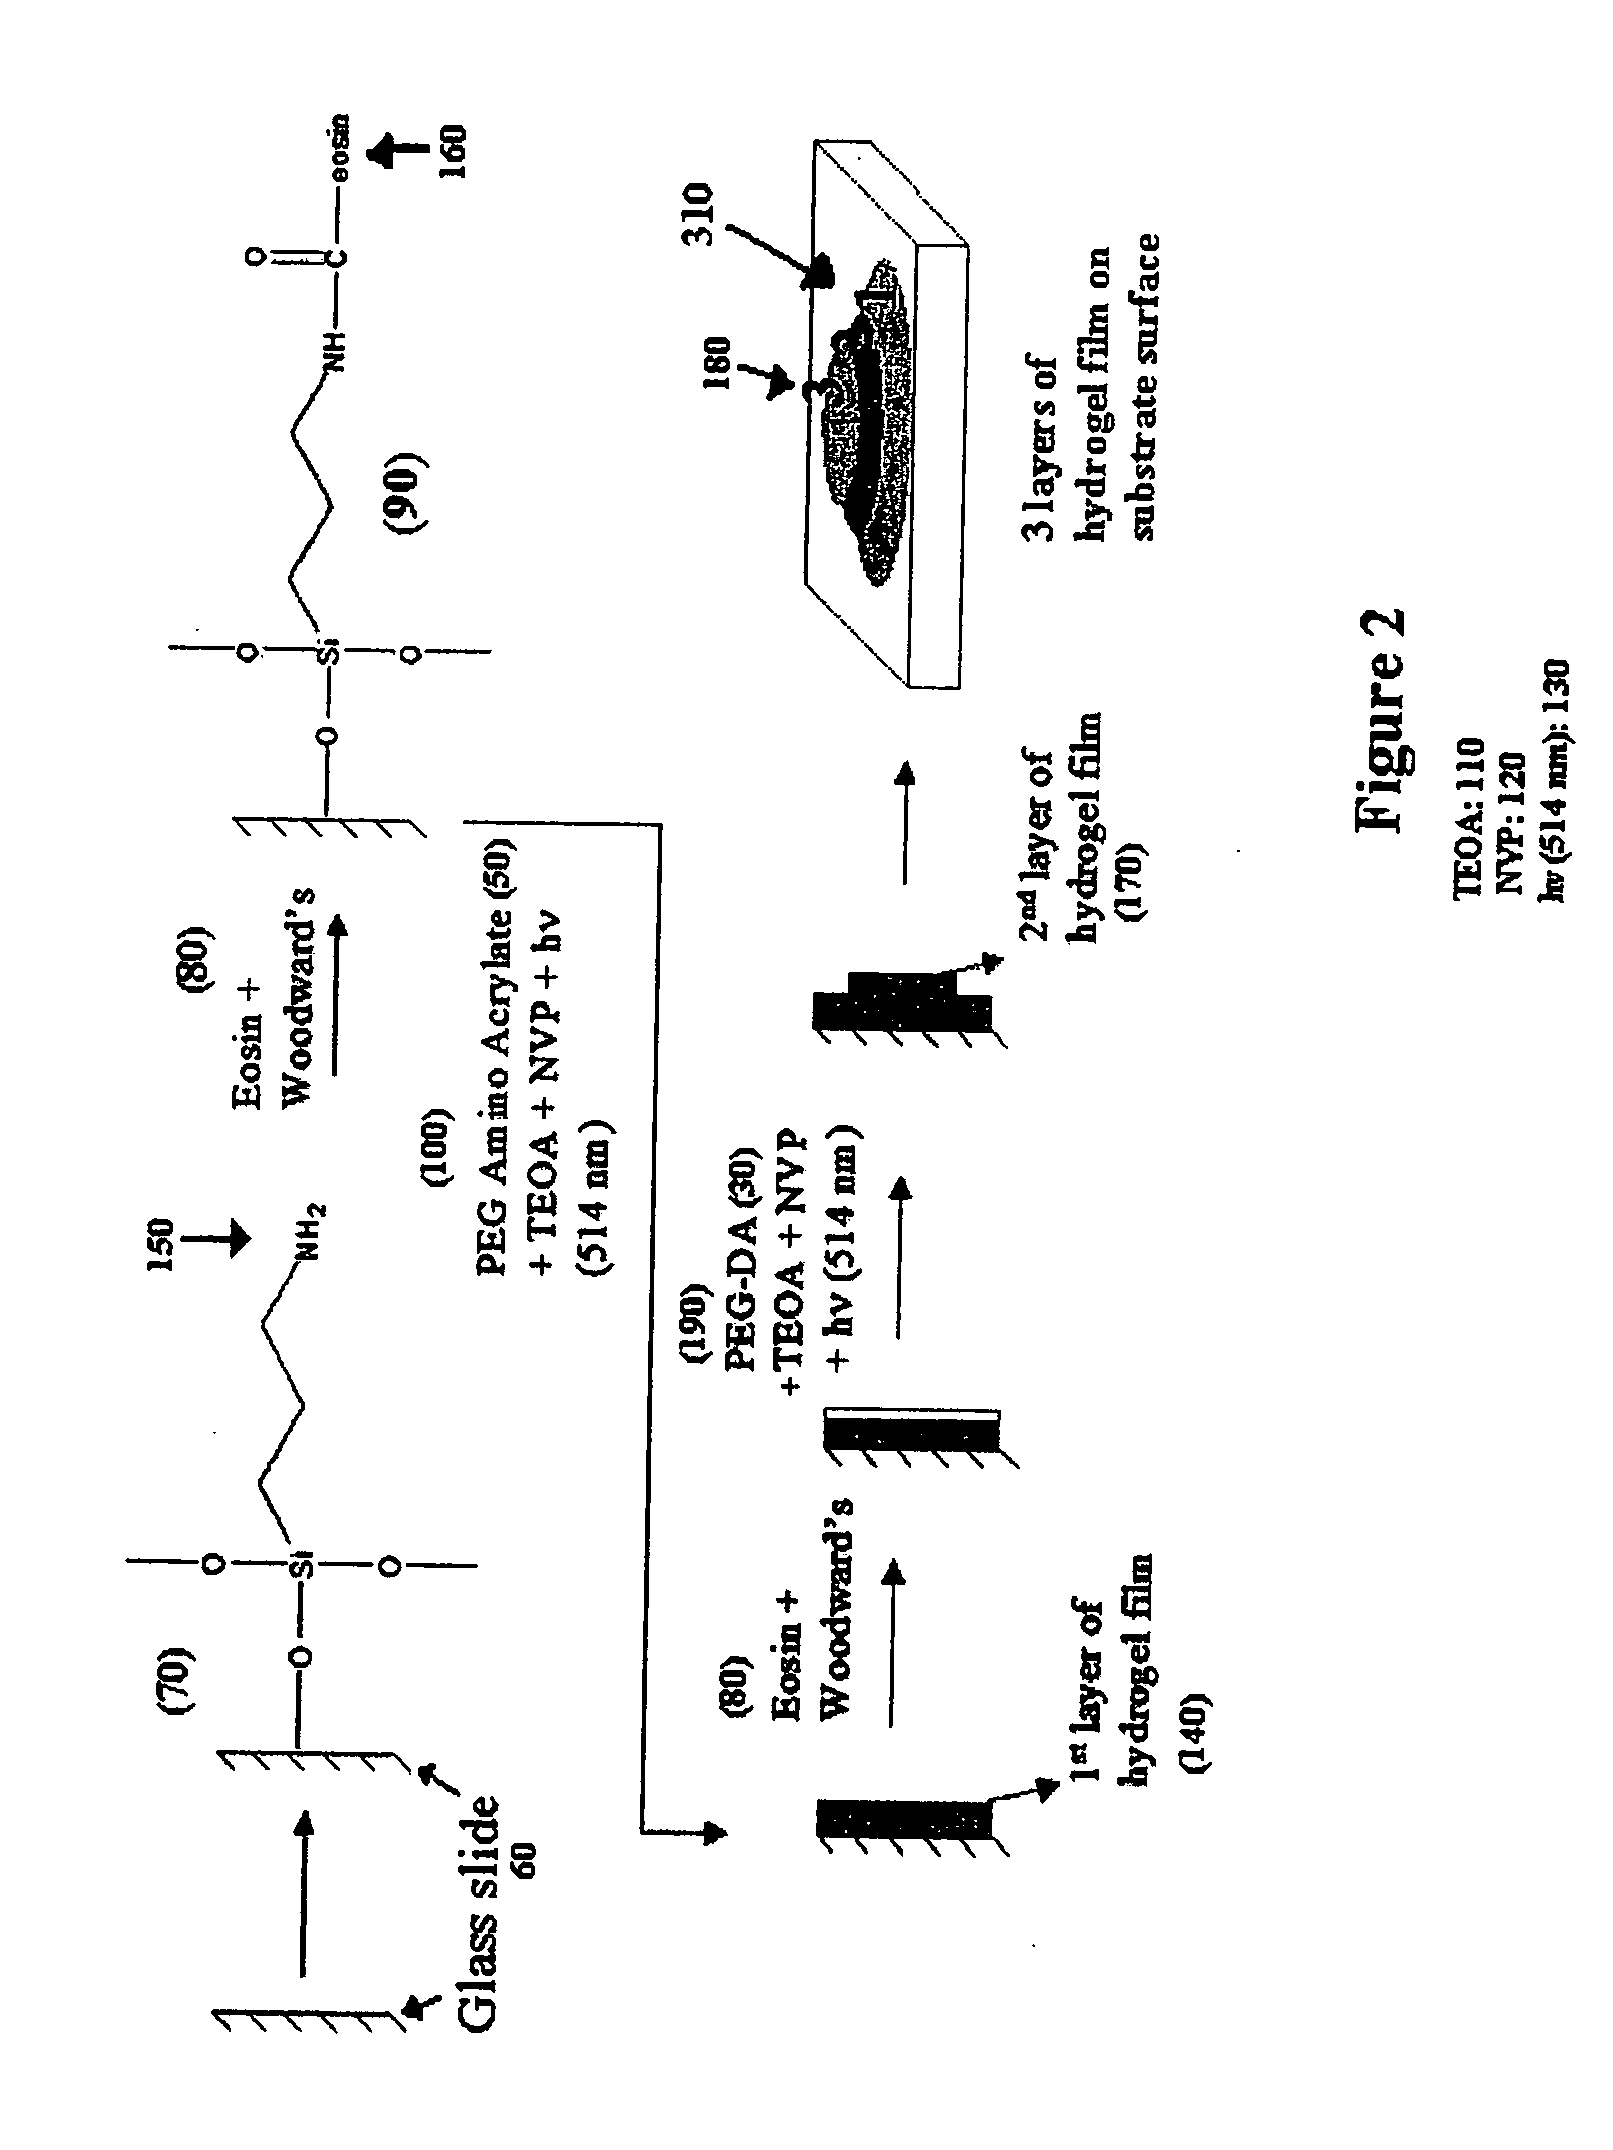 Method for the formation of hydrogel multilayers through surface initiated photopolymerization